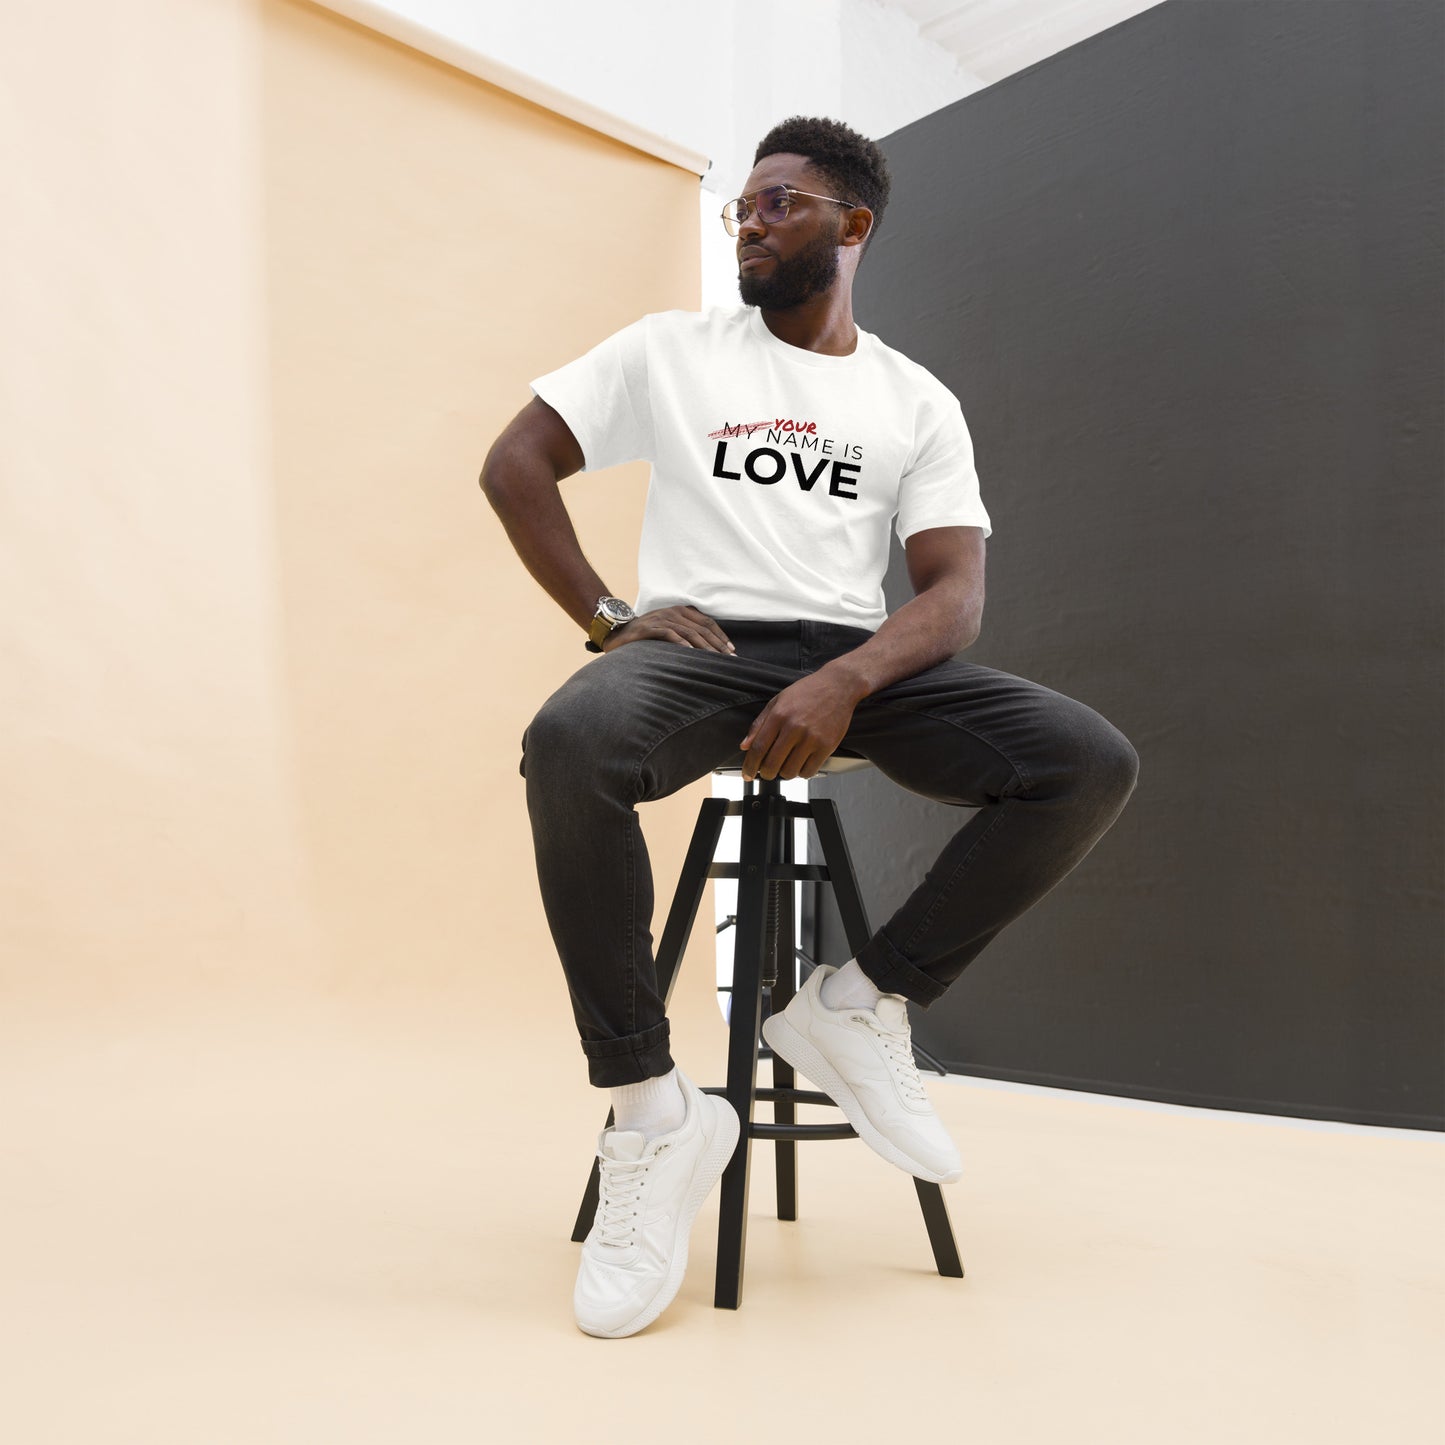 Your Name Is Love: Men's classic tee